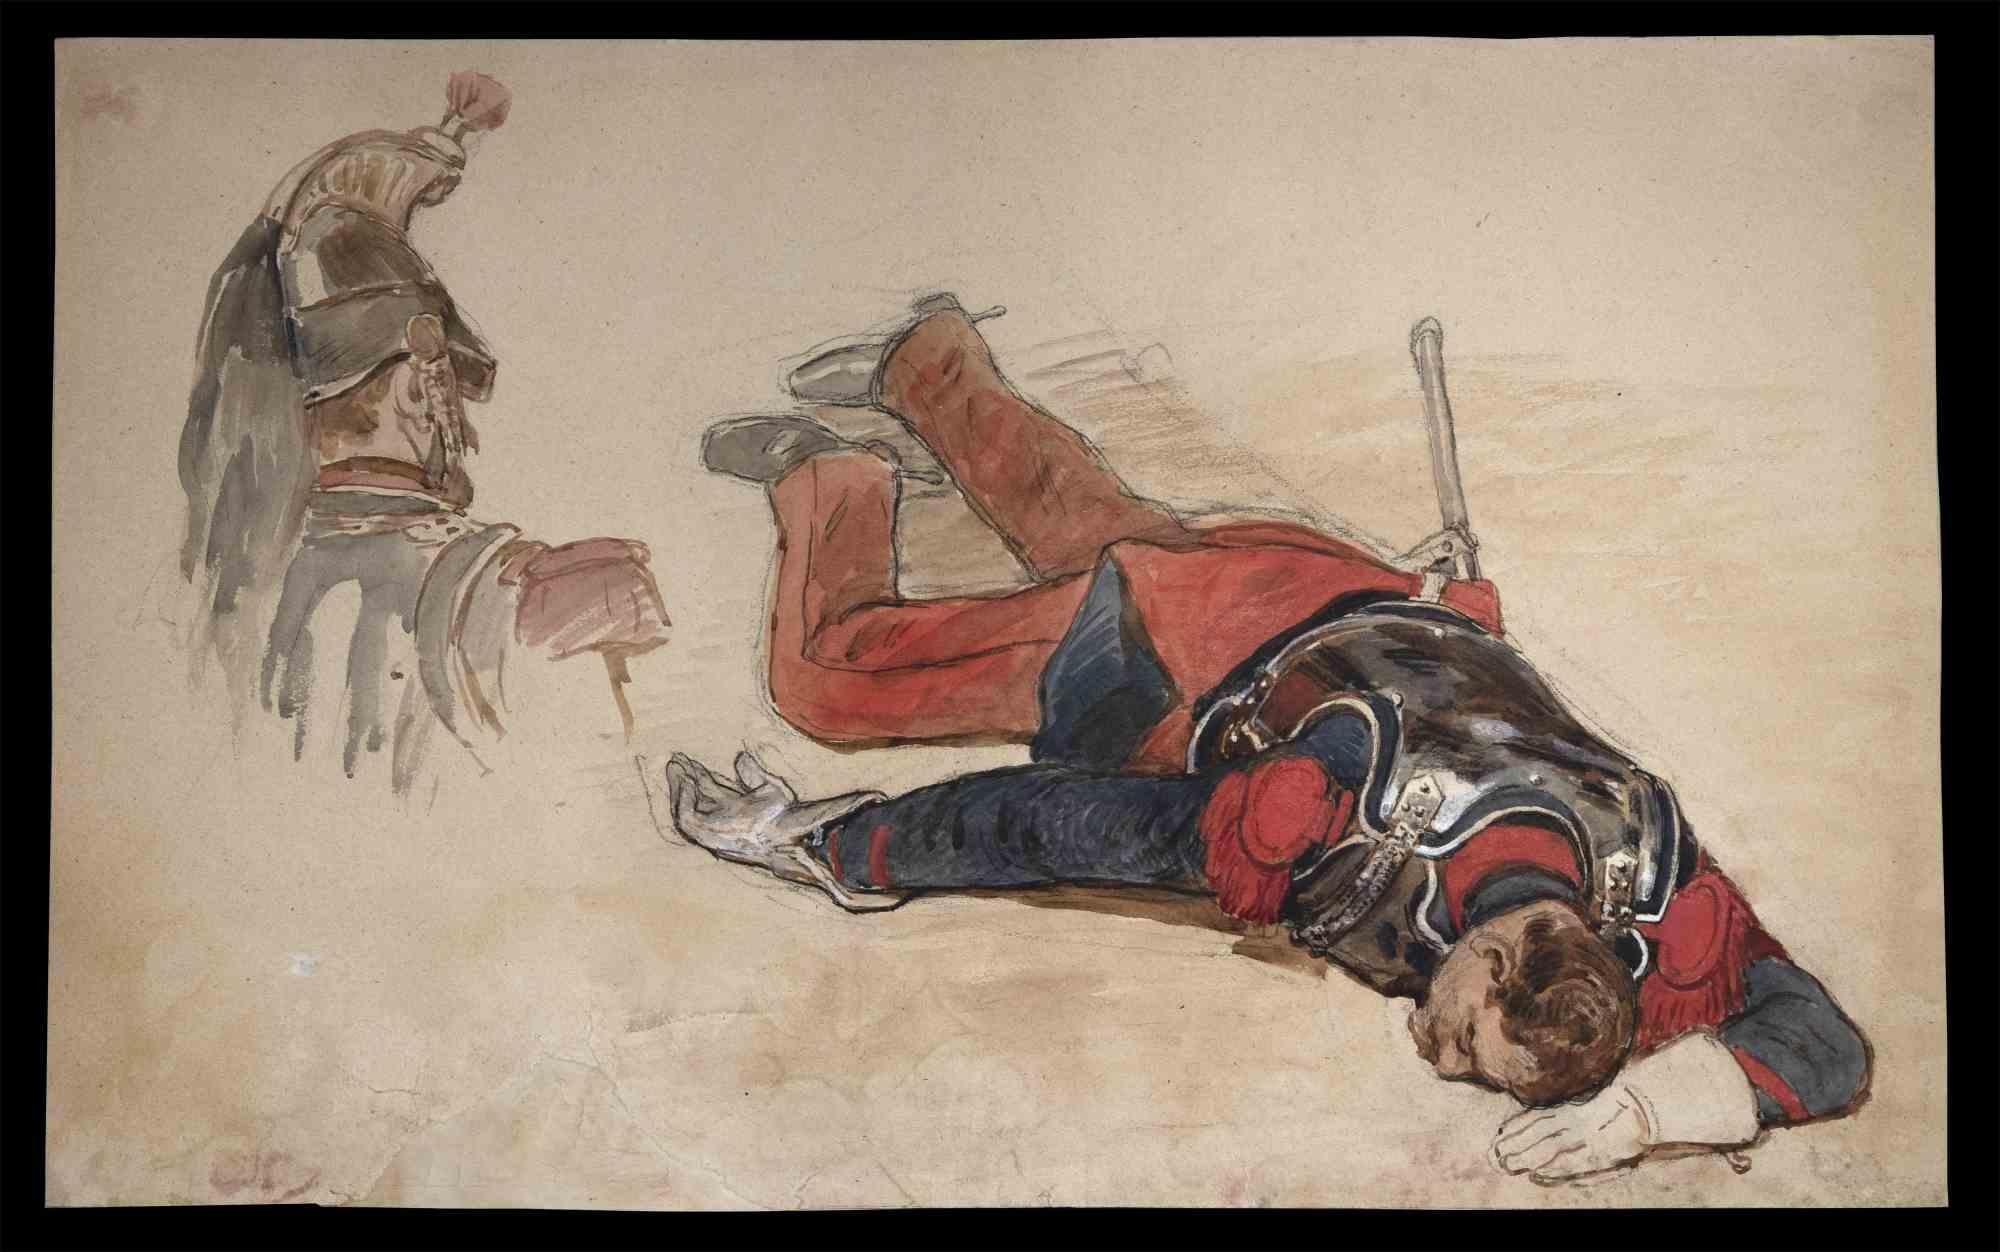 dying soldier drawing